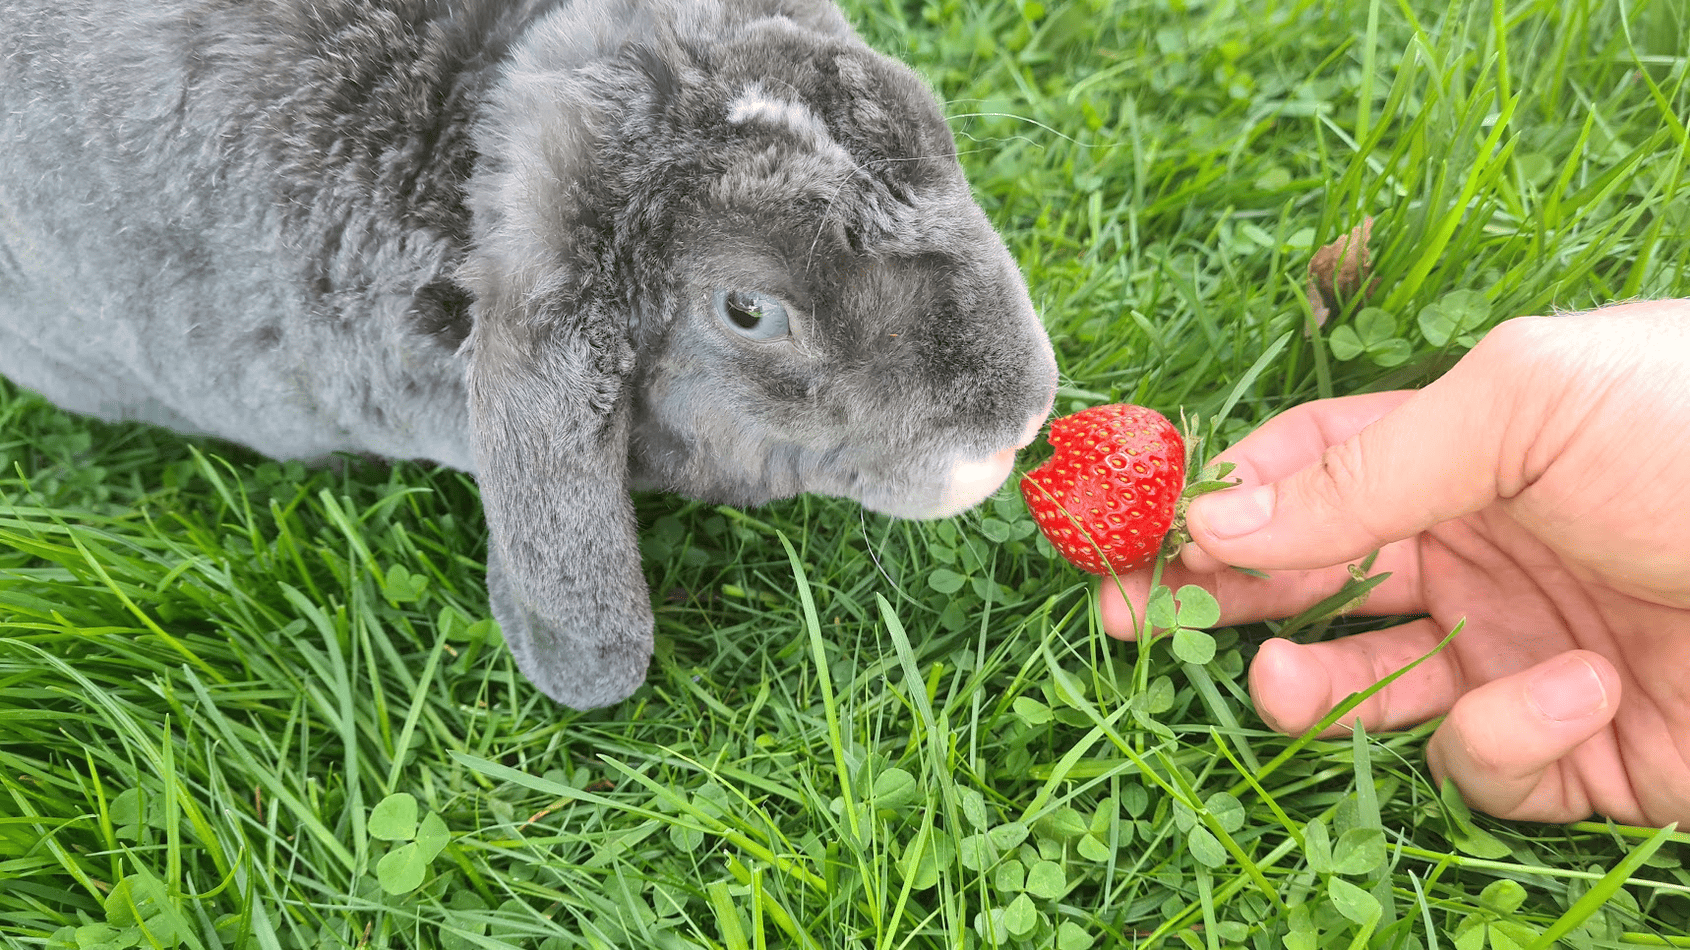 my rabbit poe, eating a strawberry from my hand